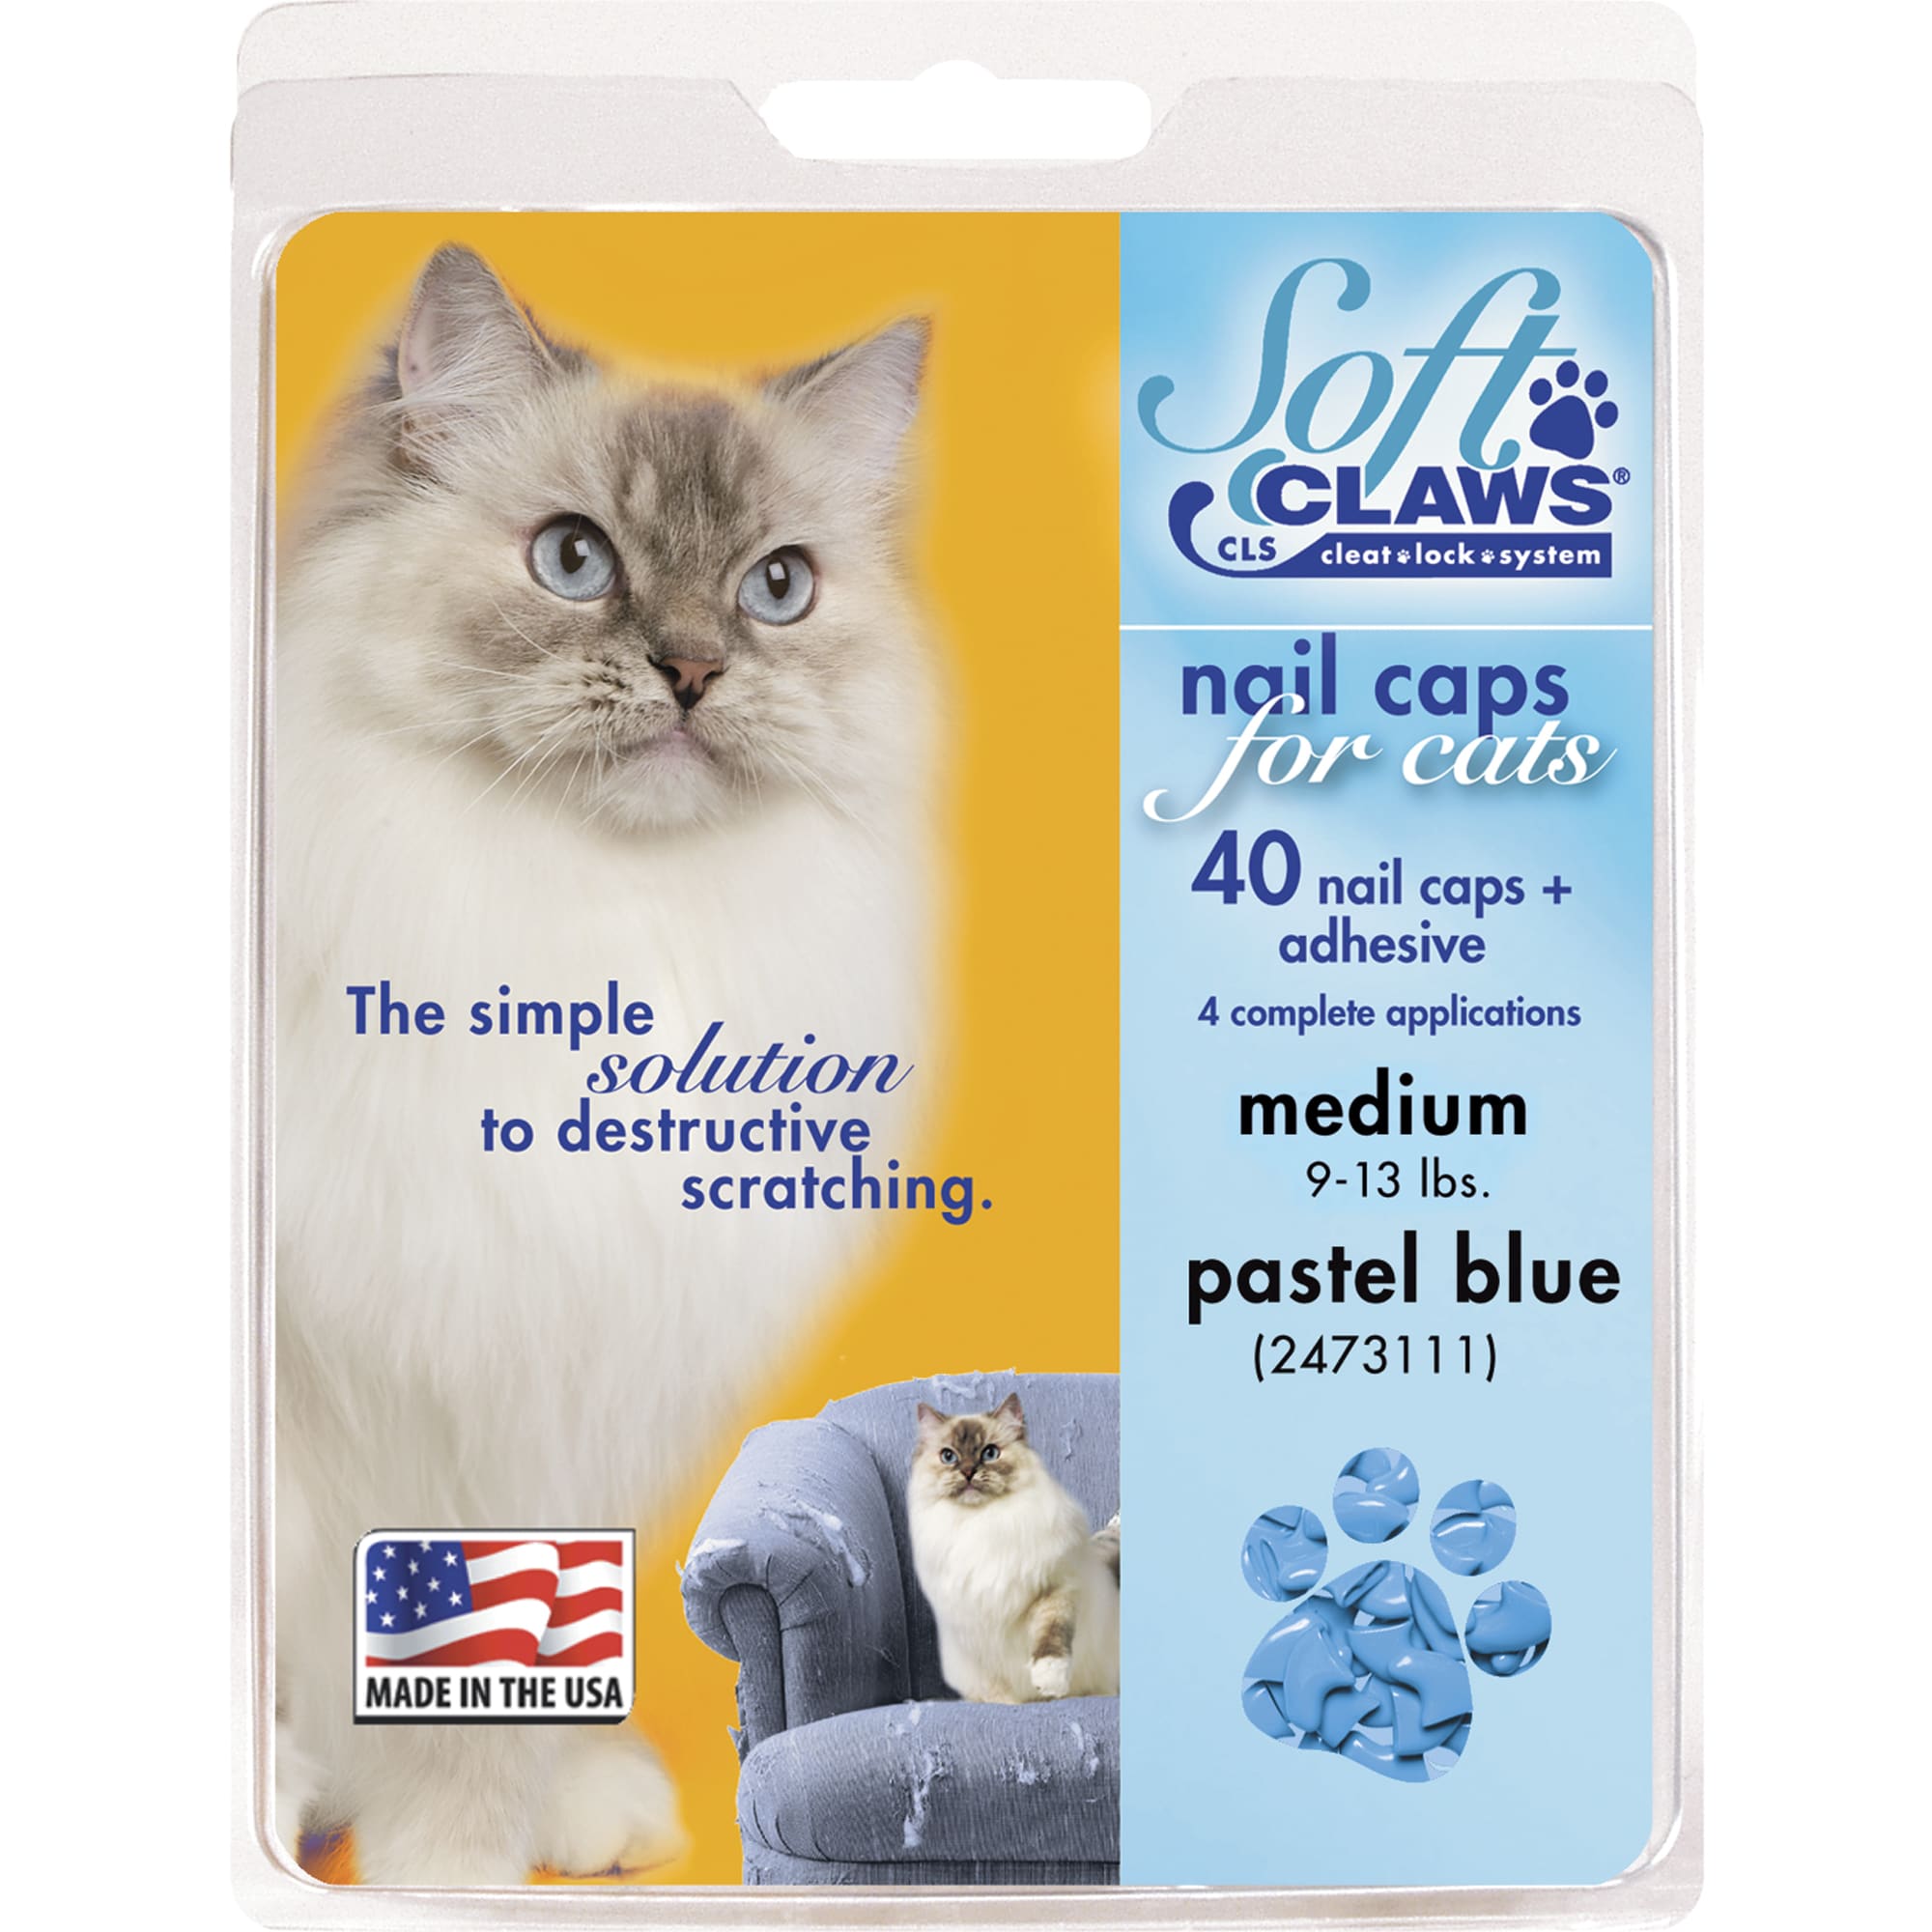 Cat Nail Caps for sale